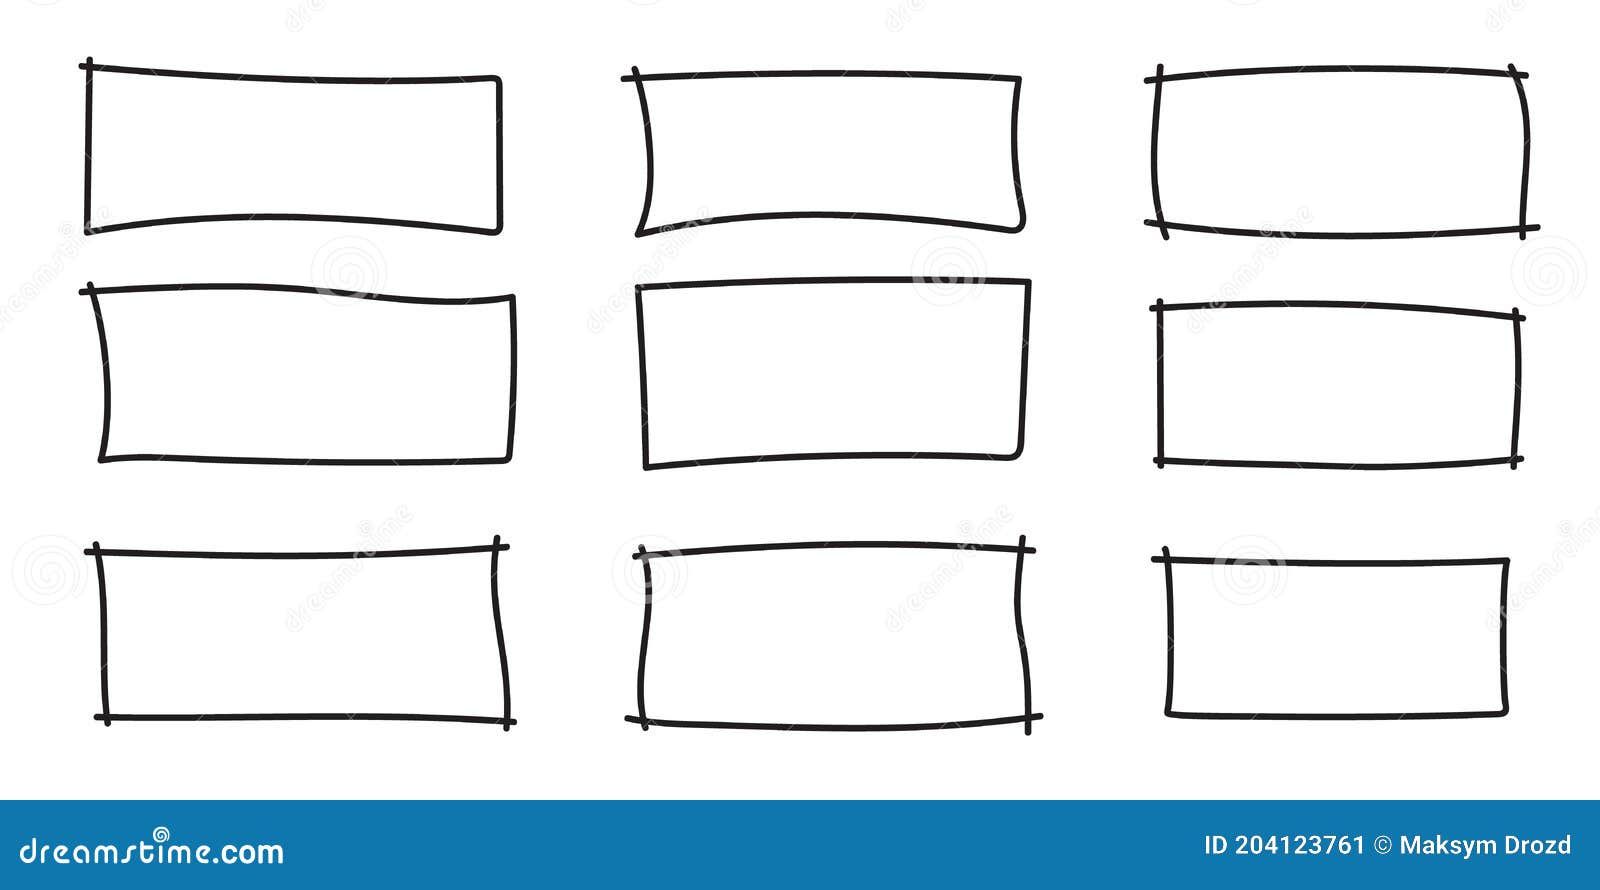 hand drawn doodle rectangle frames, text box and frames.